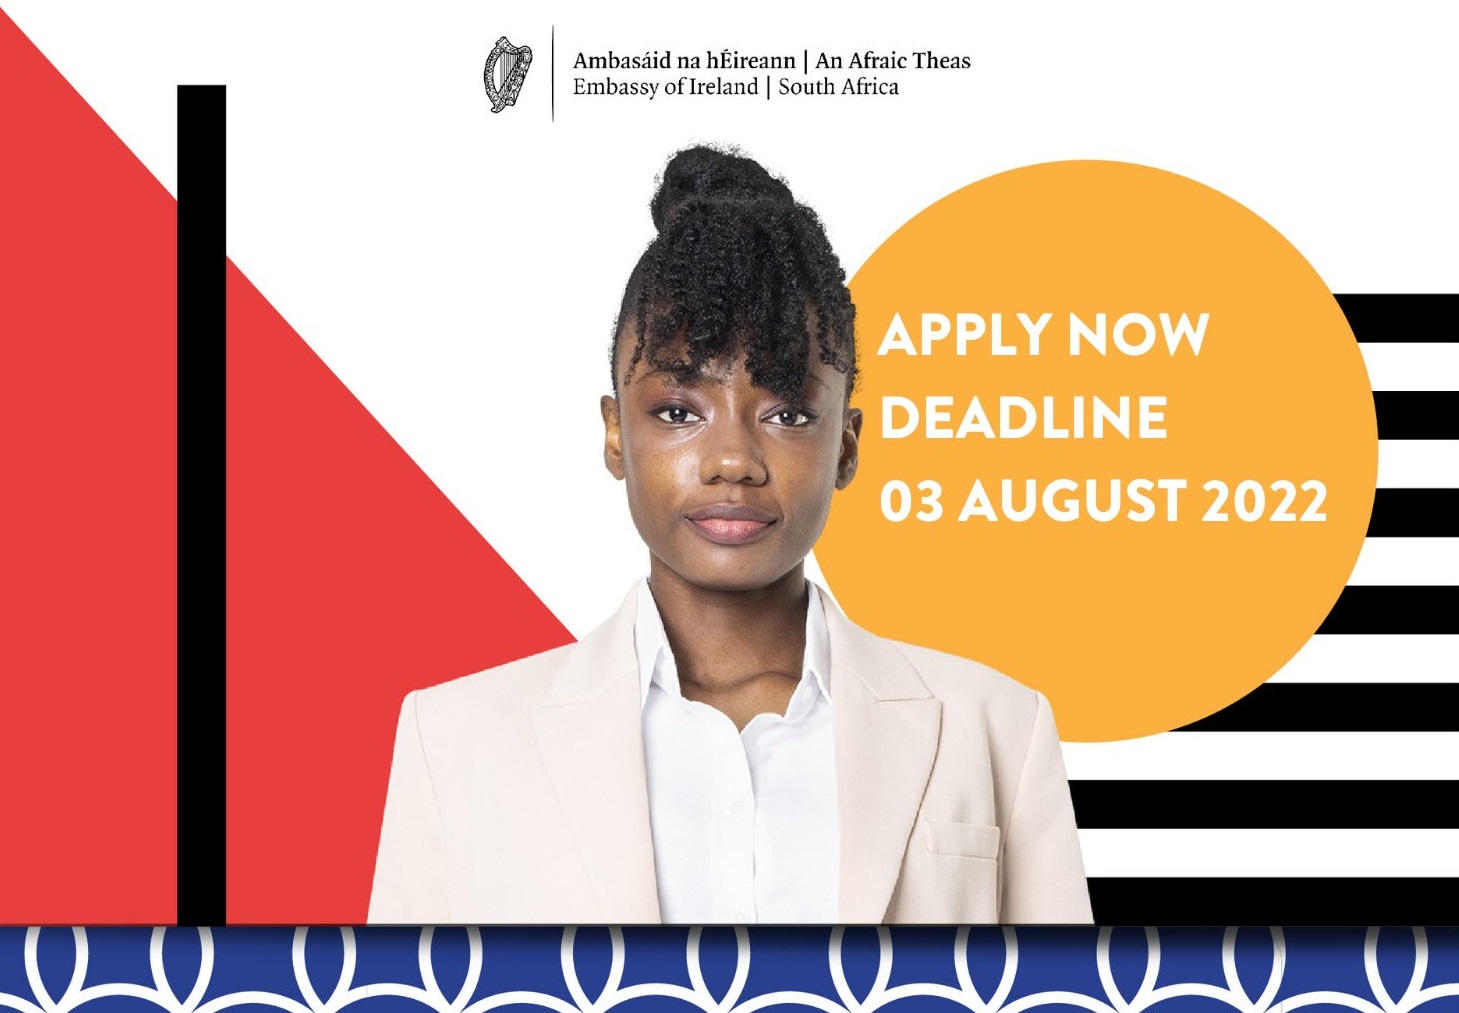 Kader Asmal Fellowship Programme 2023/2024 for South African Students (Fully-funded to Ireland)